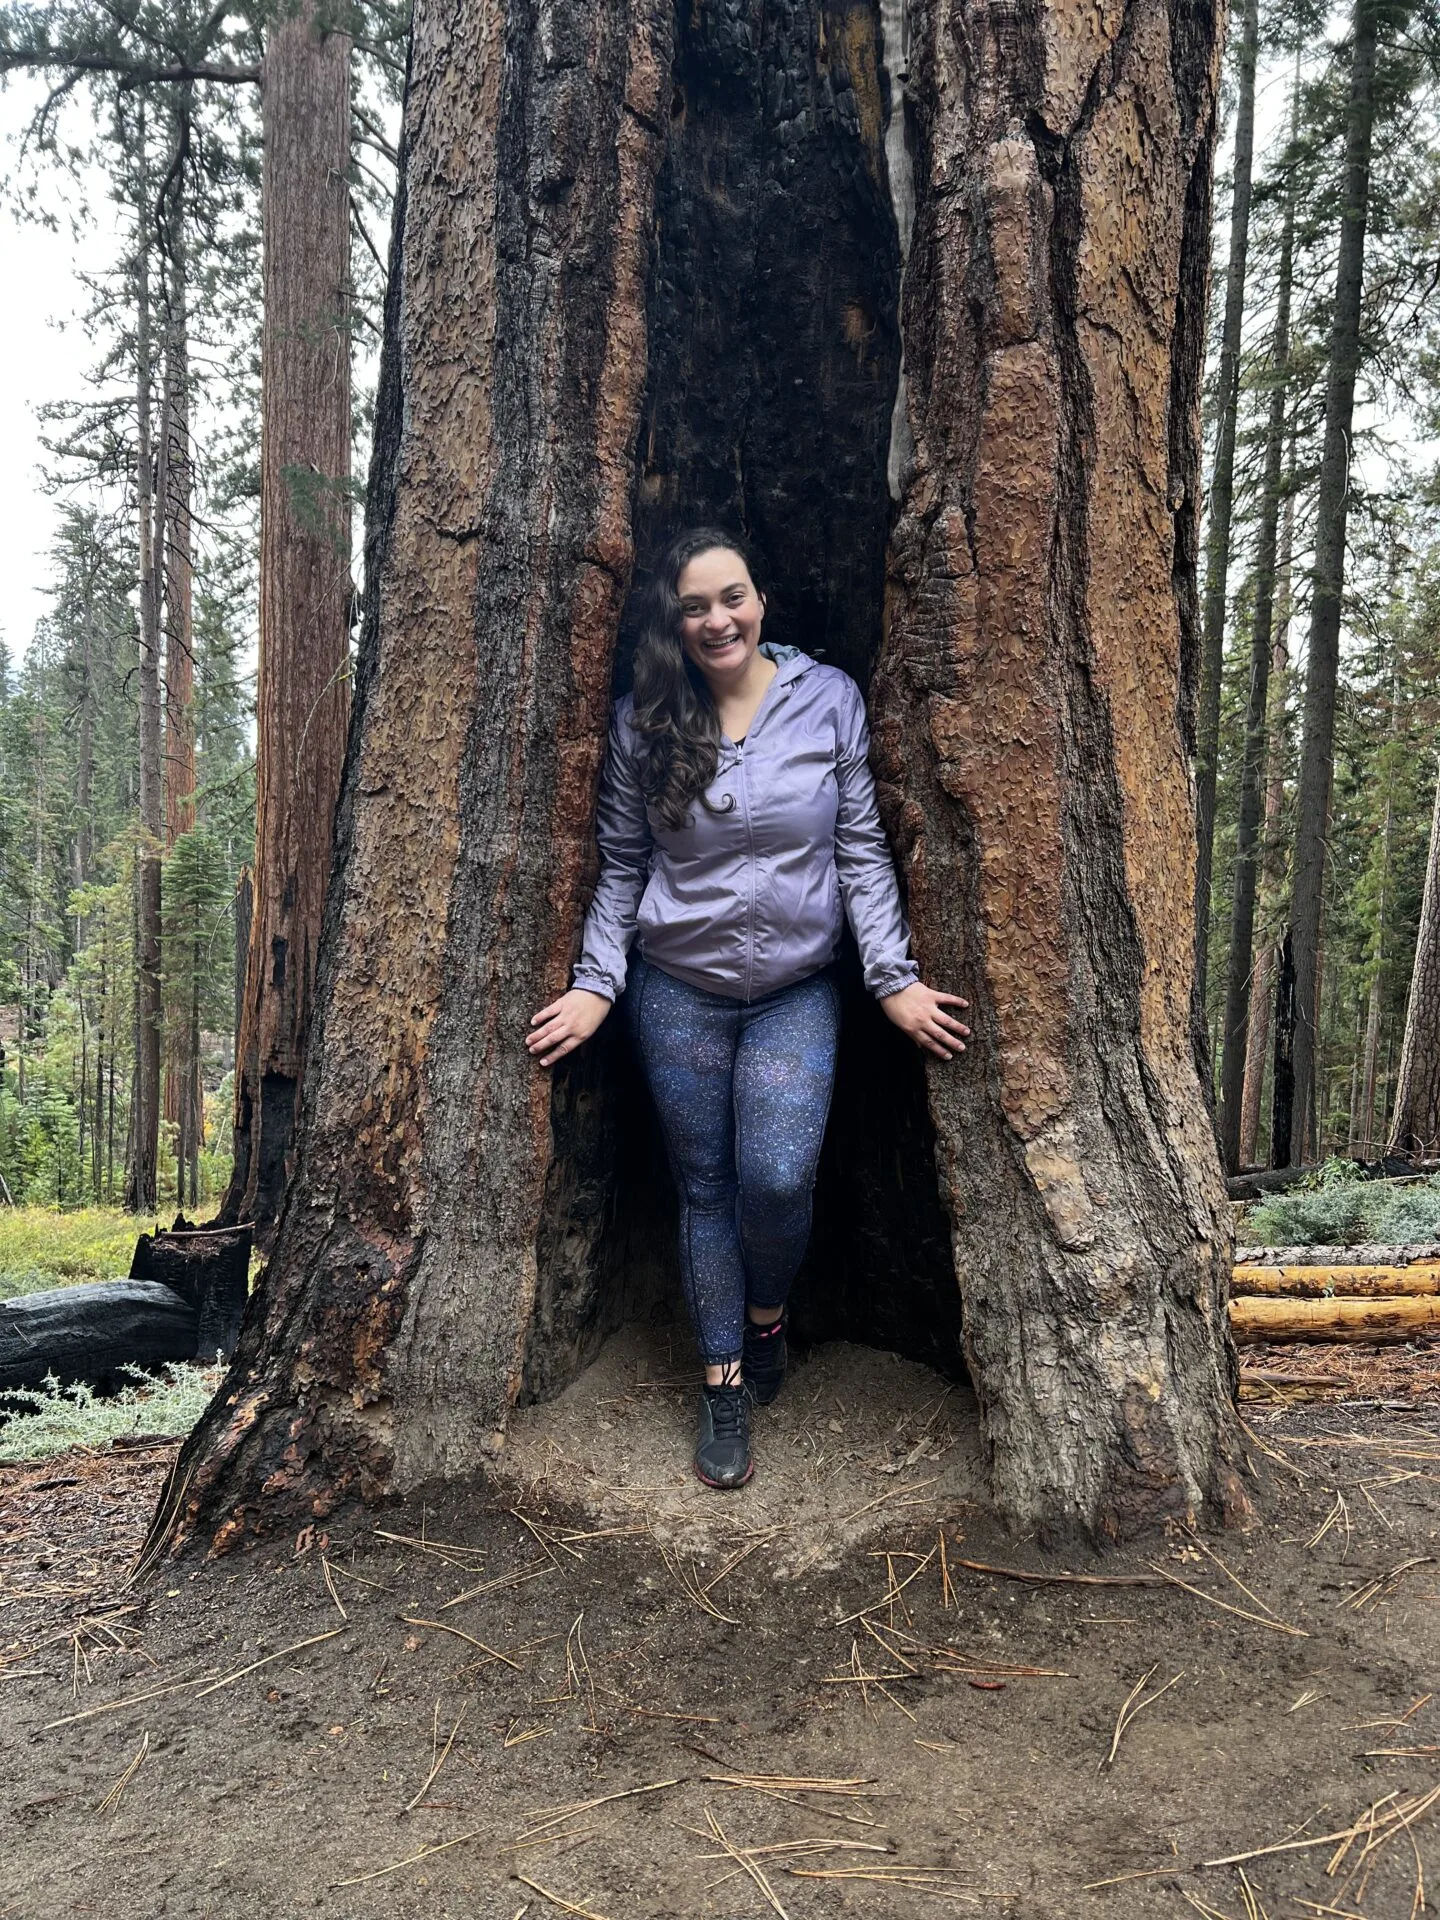 Woman standing inside hollowed out trunk of giant sequoia tree